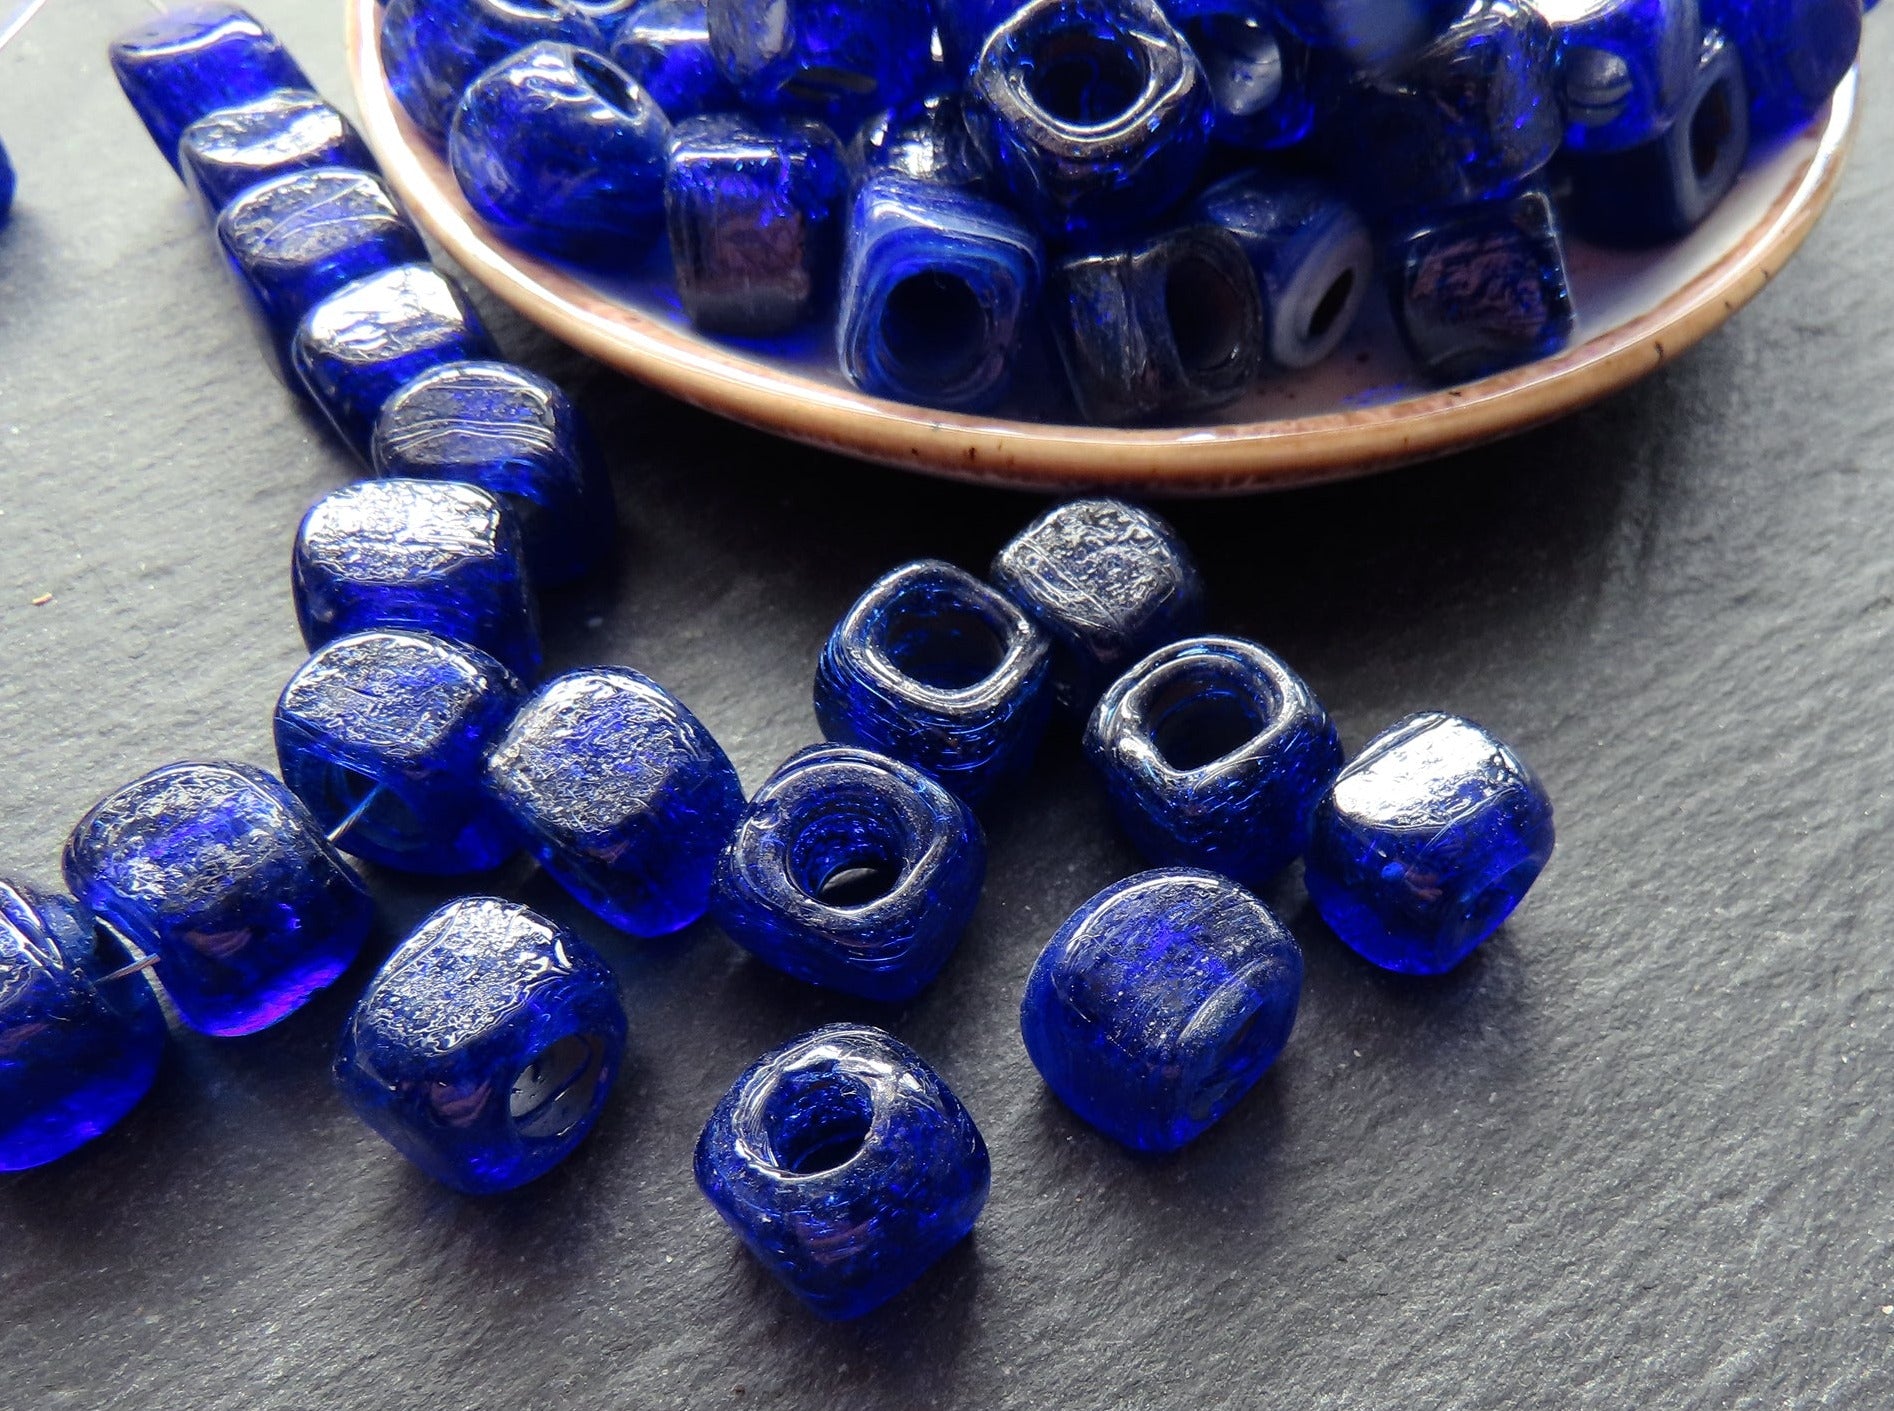 Traditional Turkish Artisan Handmade Round Glass Beads, Large Hole Glass  Beads, 25 Beads in a pack